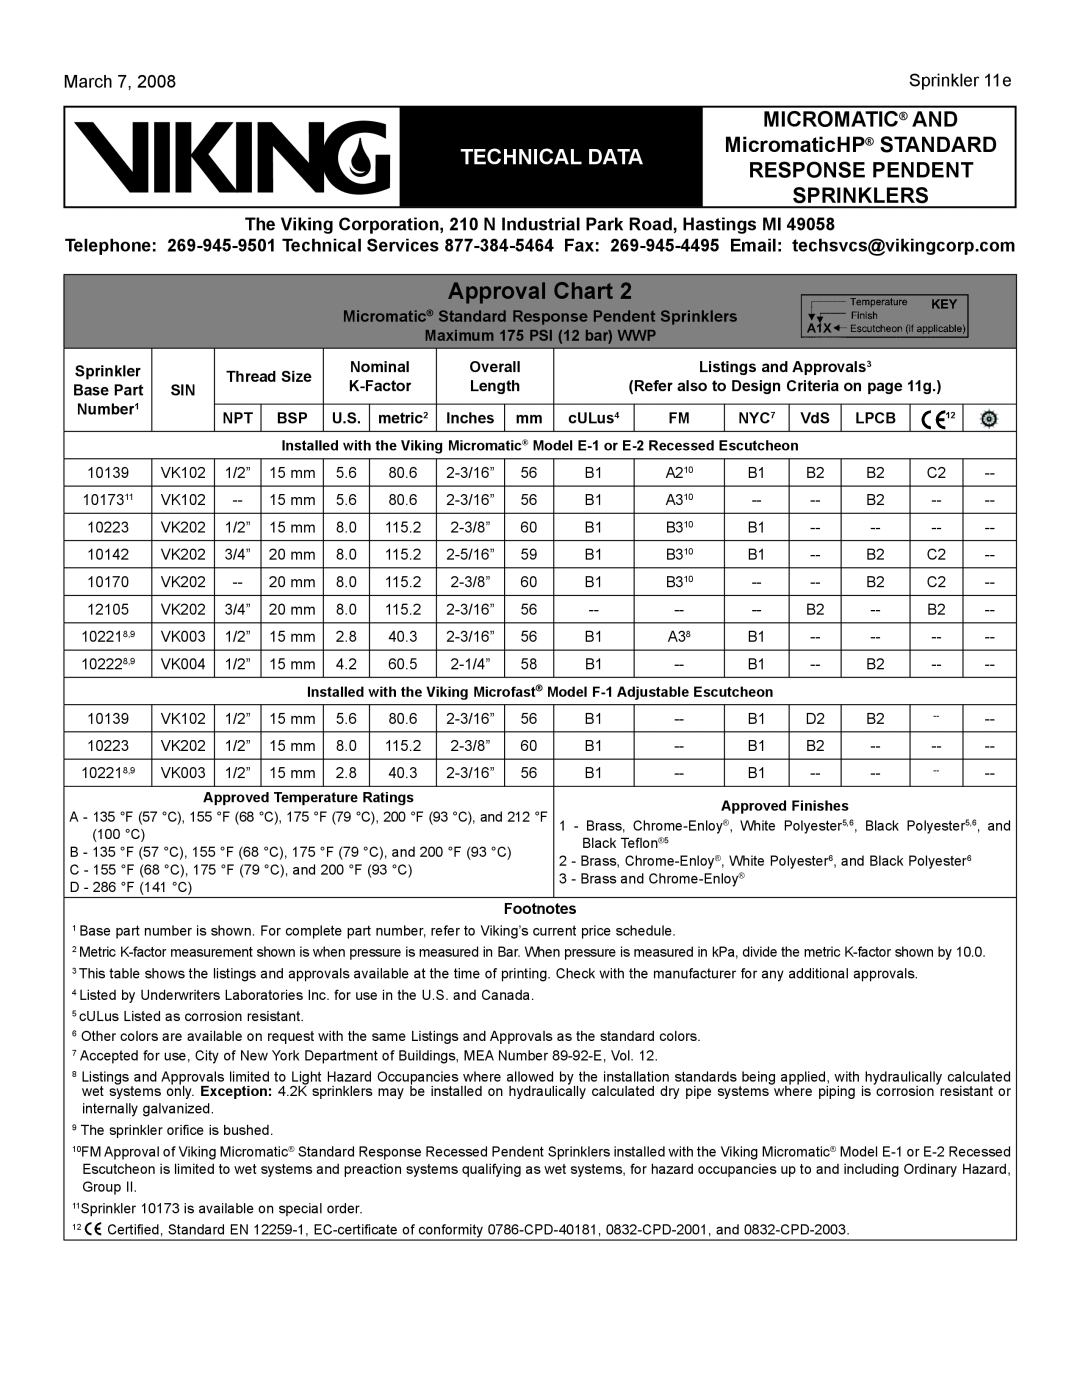 Viking Sprinkler 11a Sprinkler 11e, Approval Chart, MICROMATIC AND TECHNICAL DATA MicromaticHP STANDARD RESPONSE PENDENT 